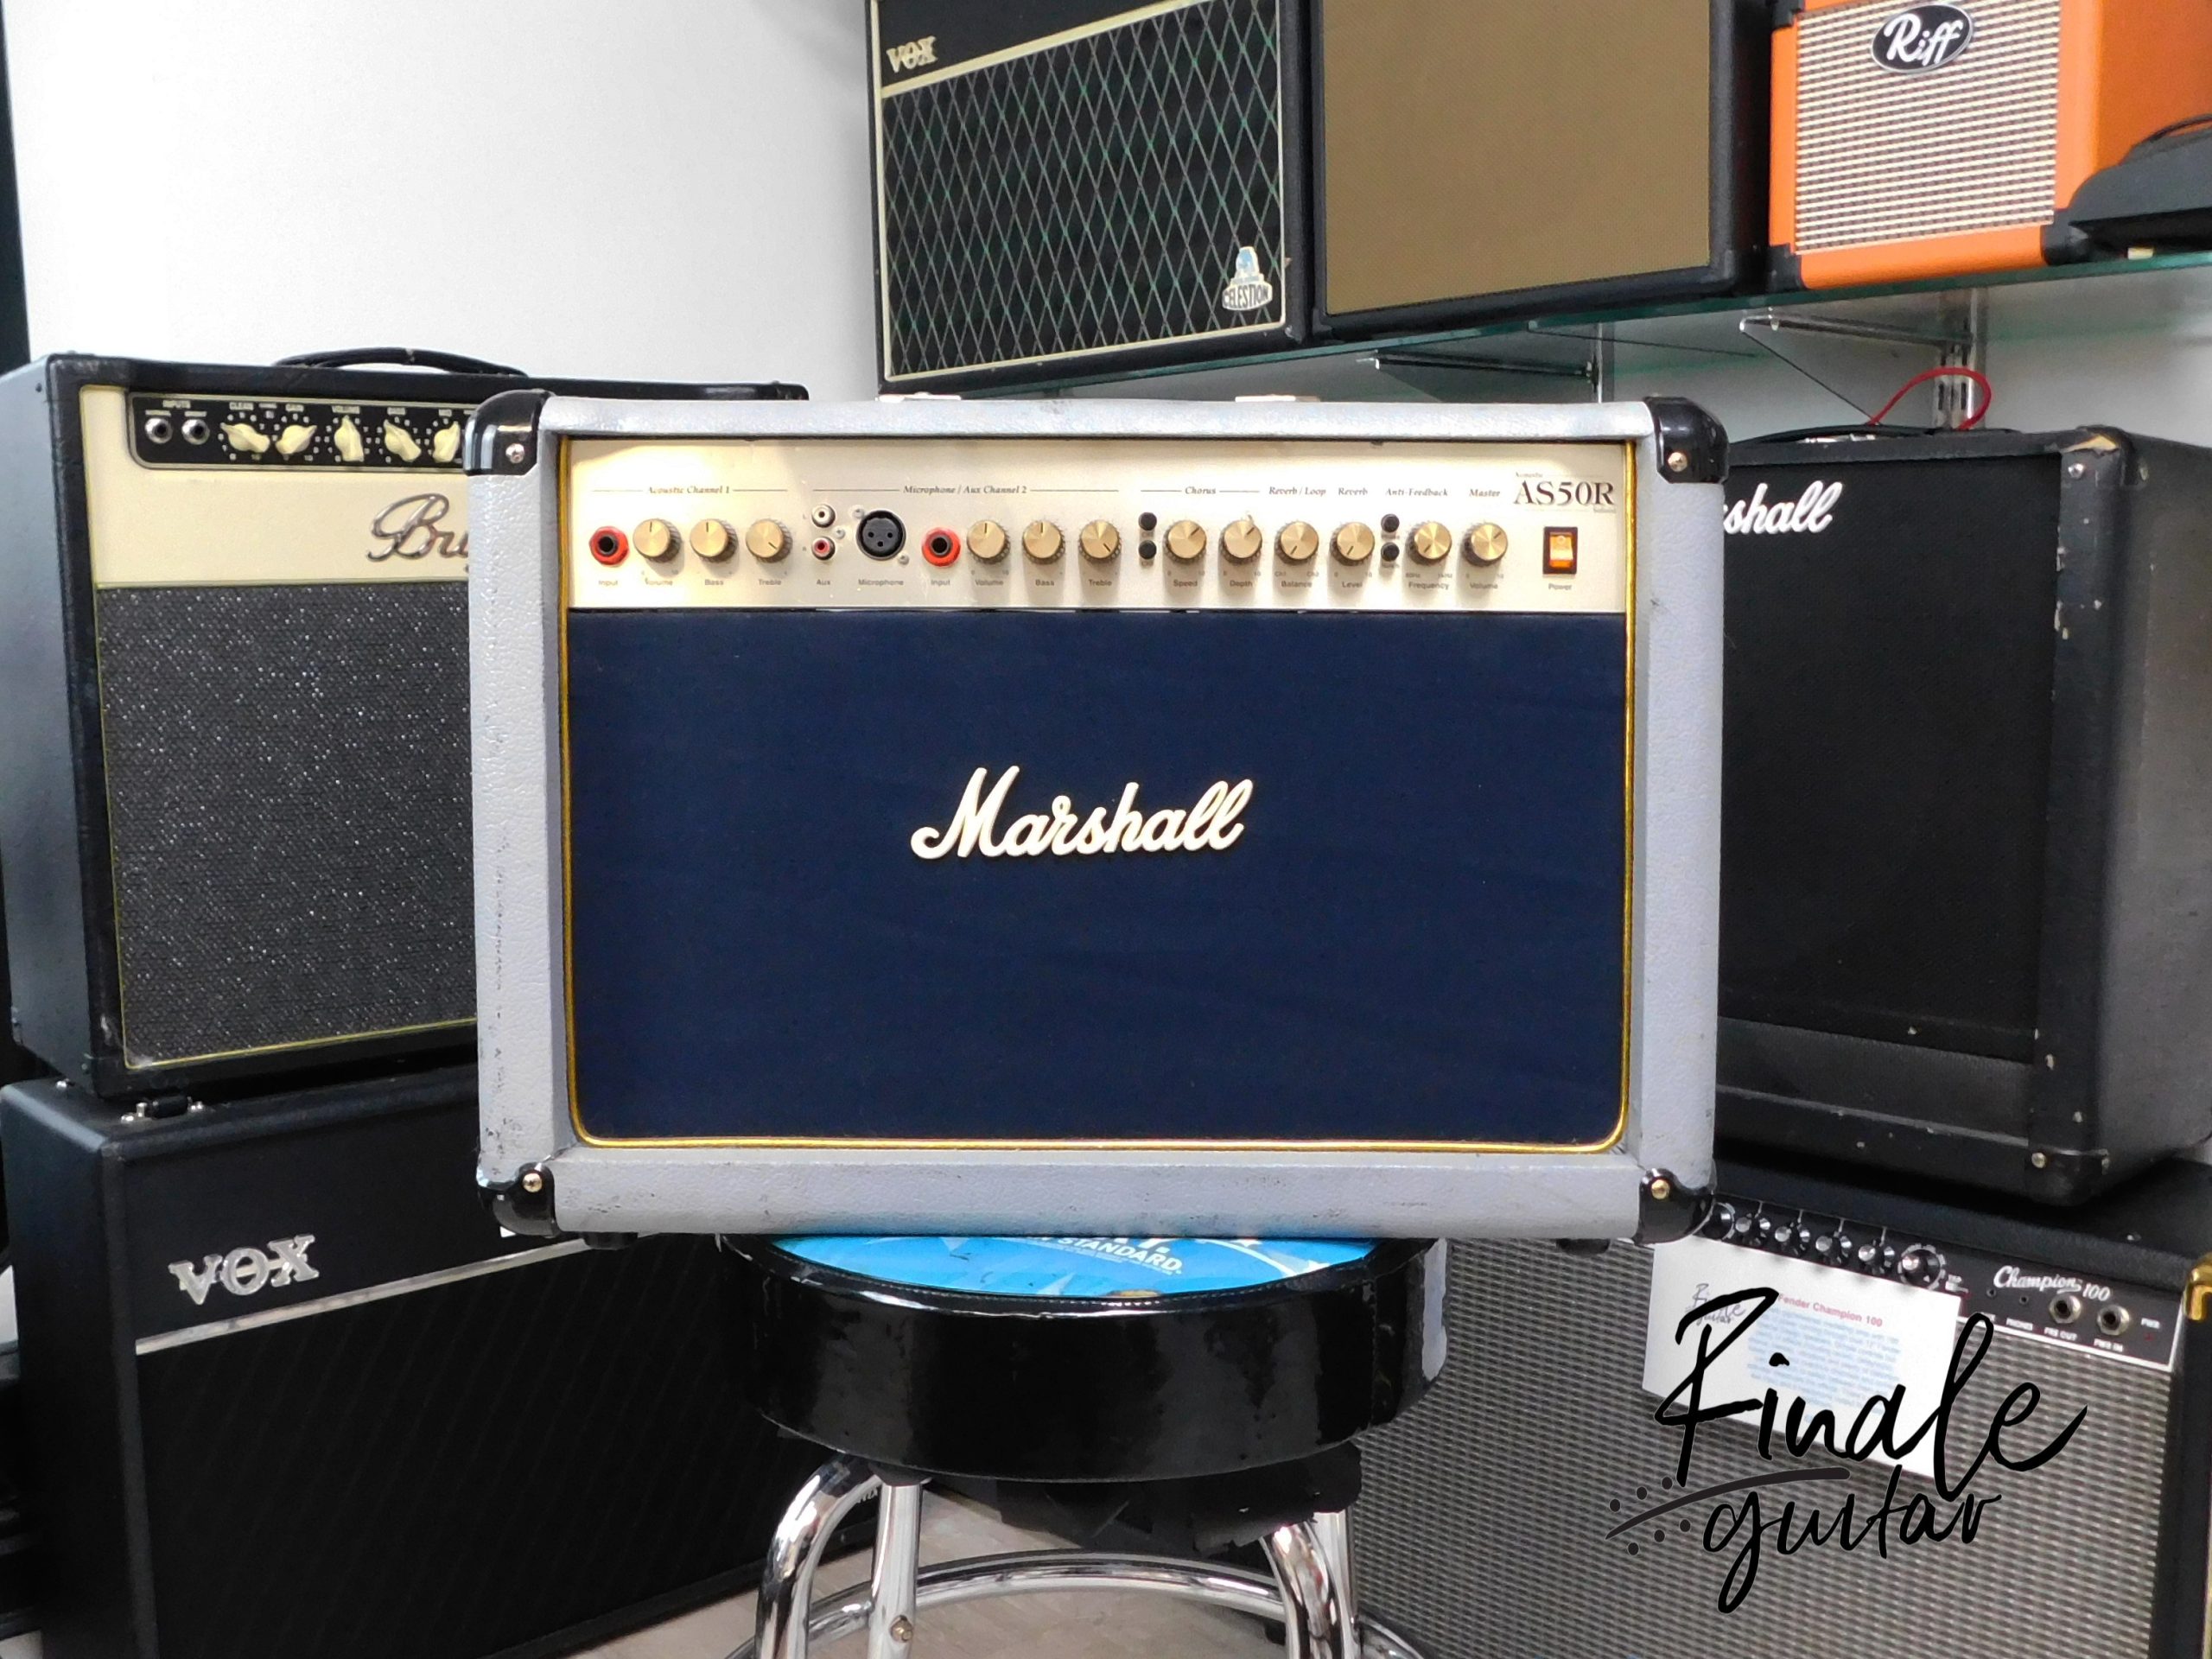 Marshall AS50R 50W acoustic amp for sale in our Sheffield guitar shop, Finale Guitar